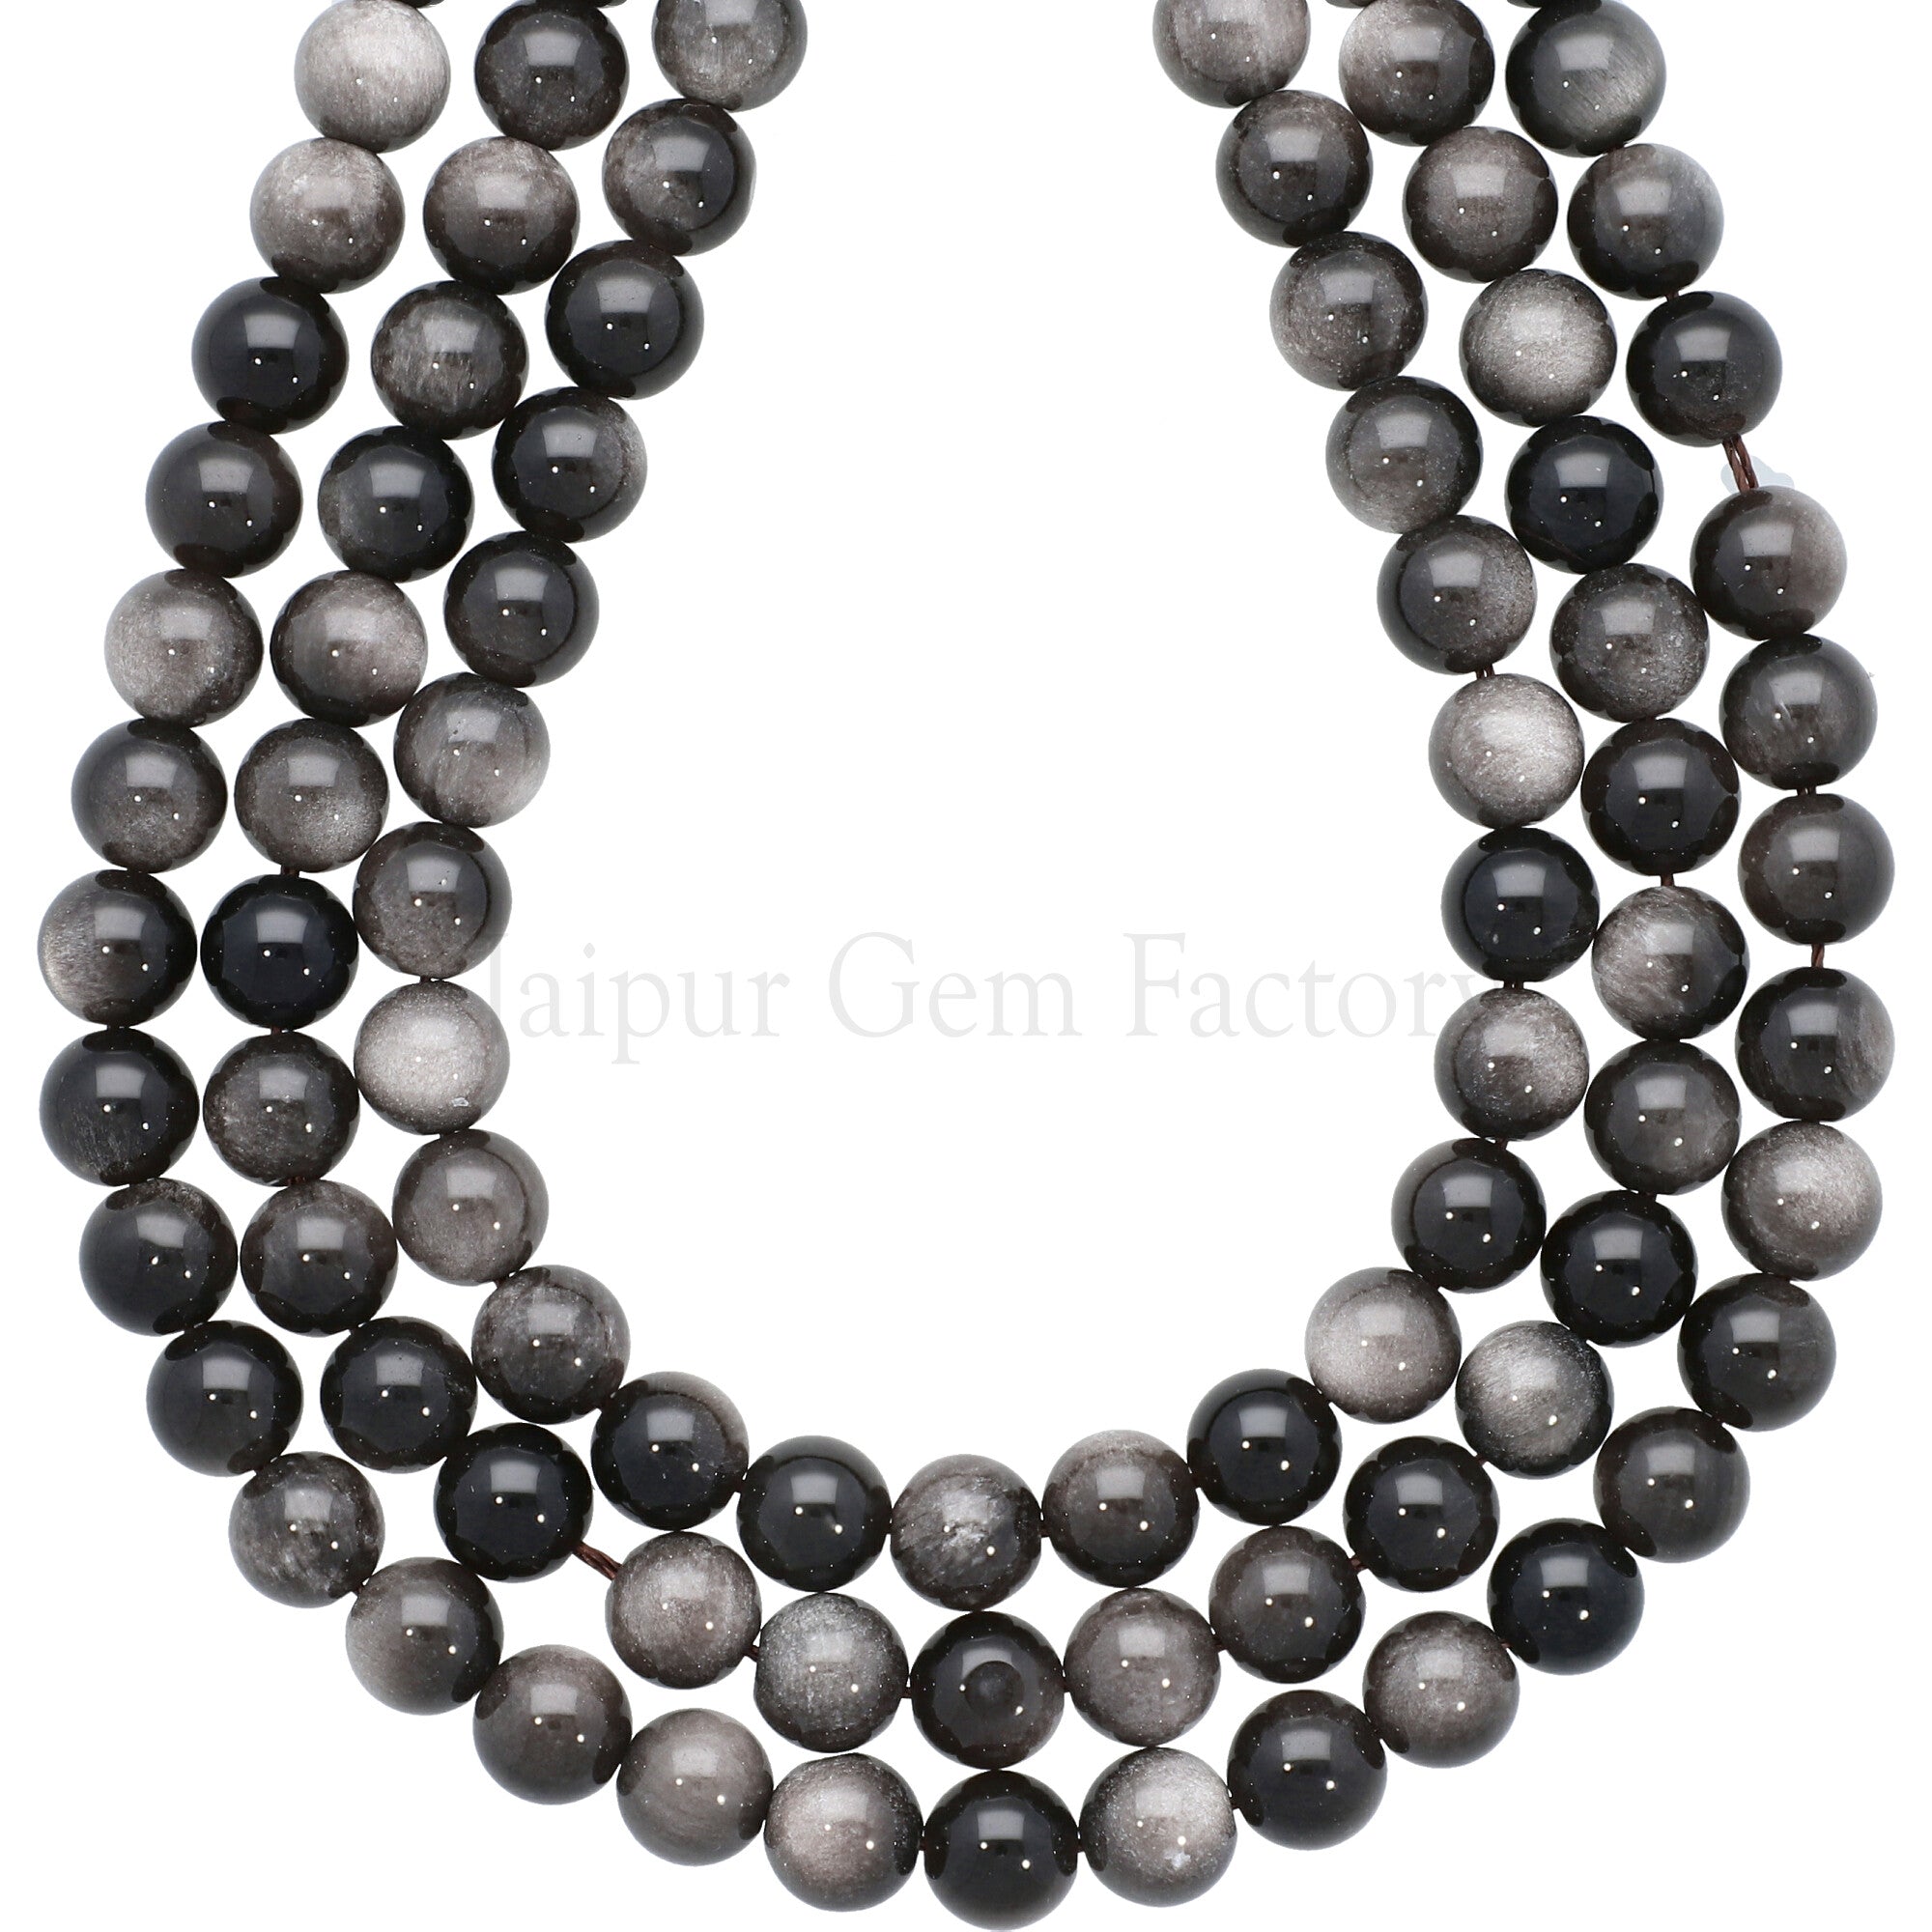 8 MM Natural Silver Obsidian Smooth Round Beads 15 Inches Strand